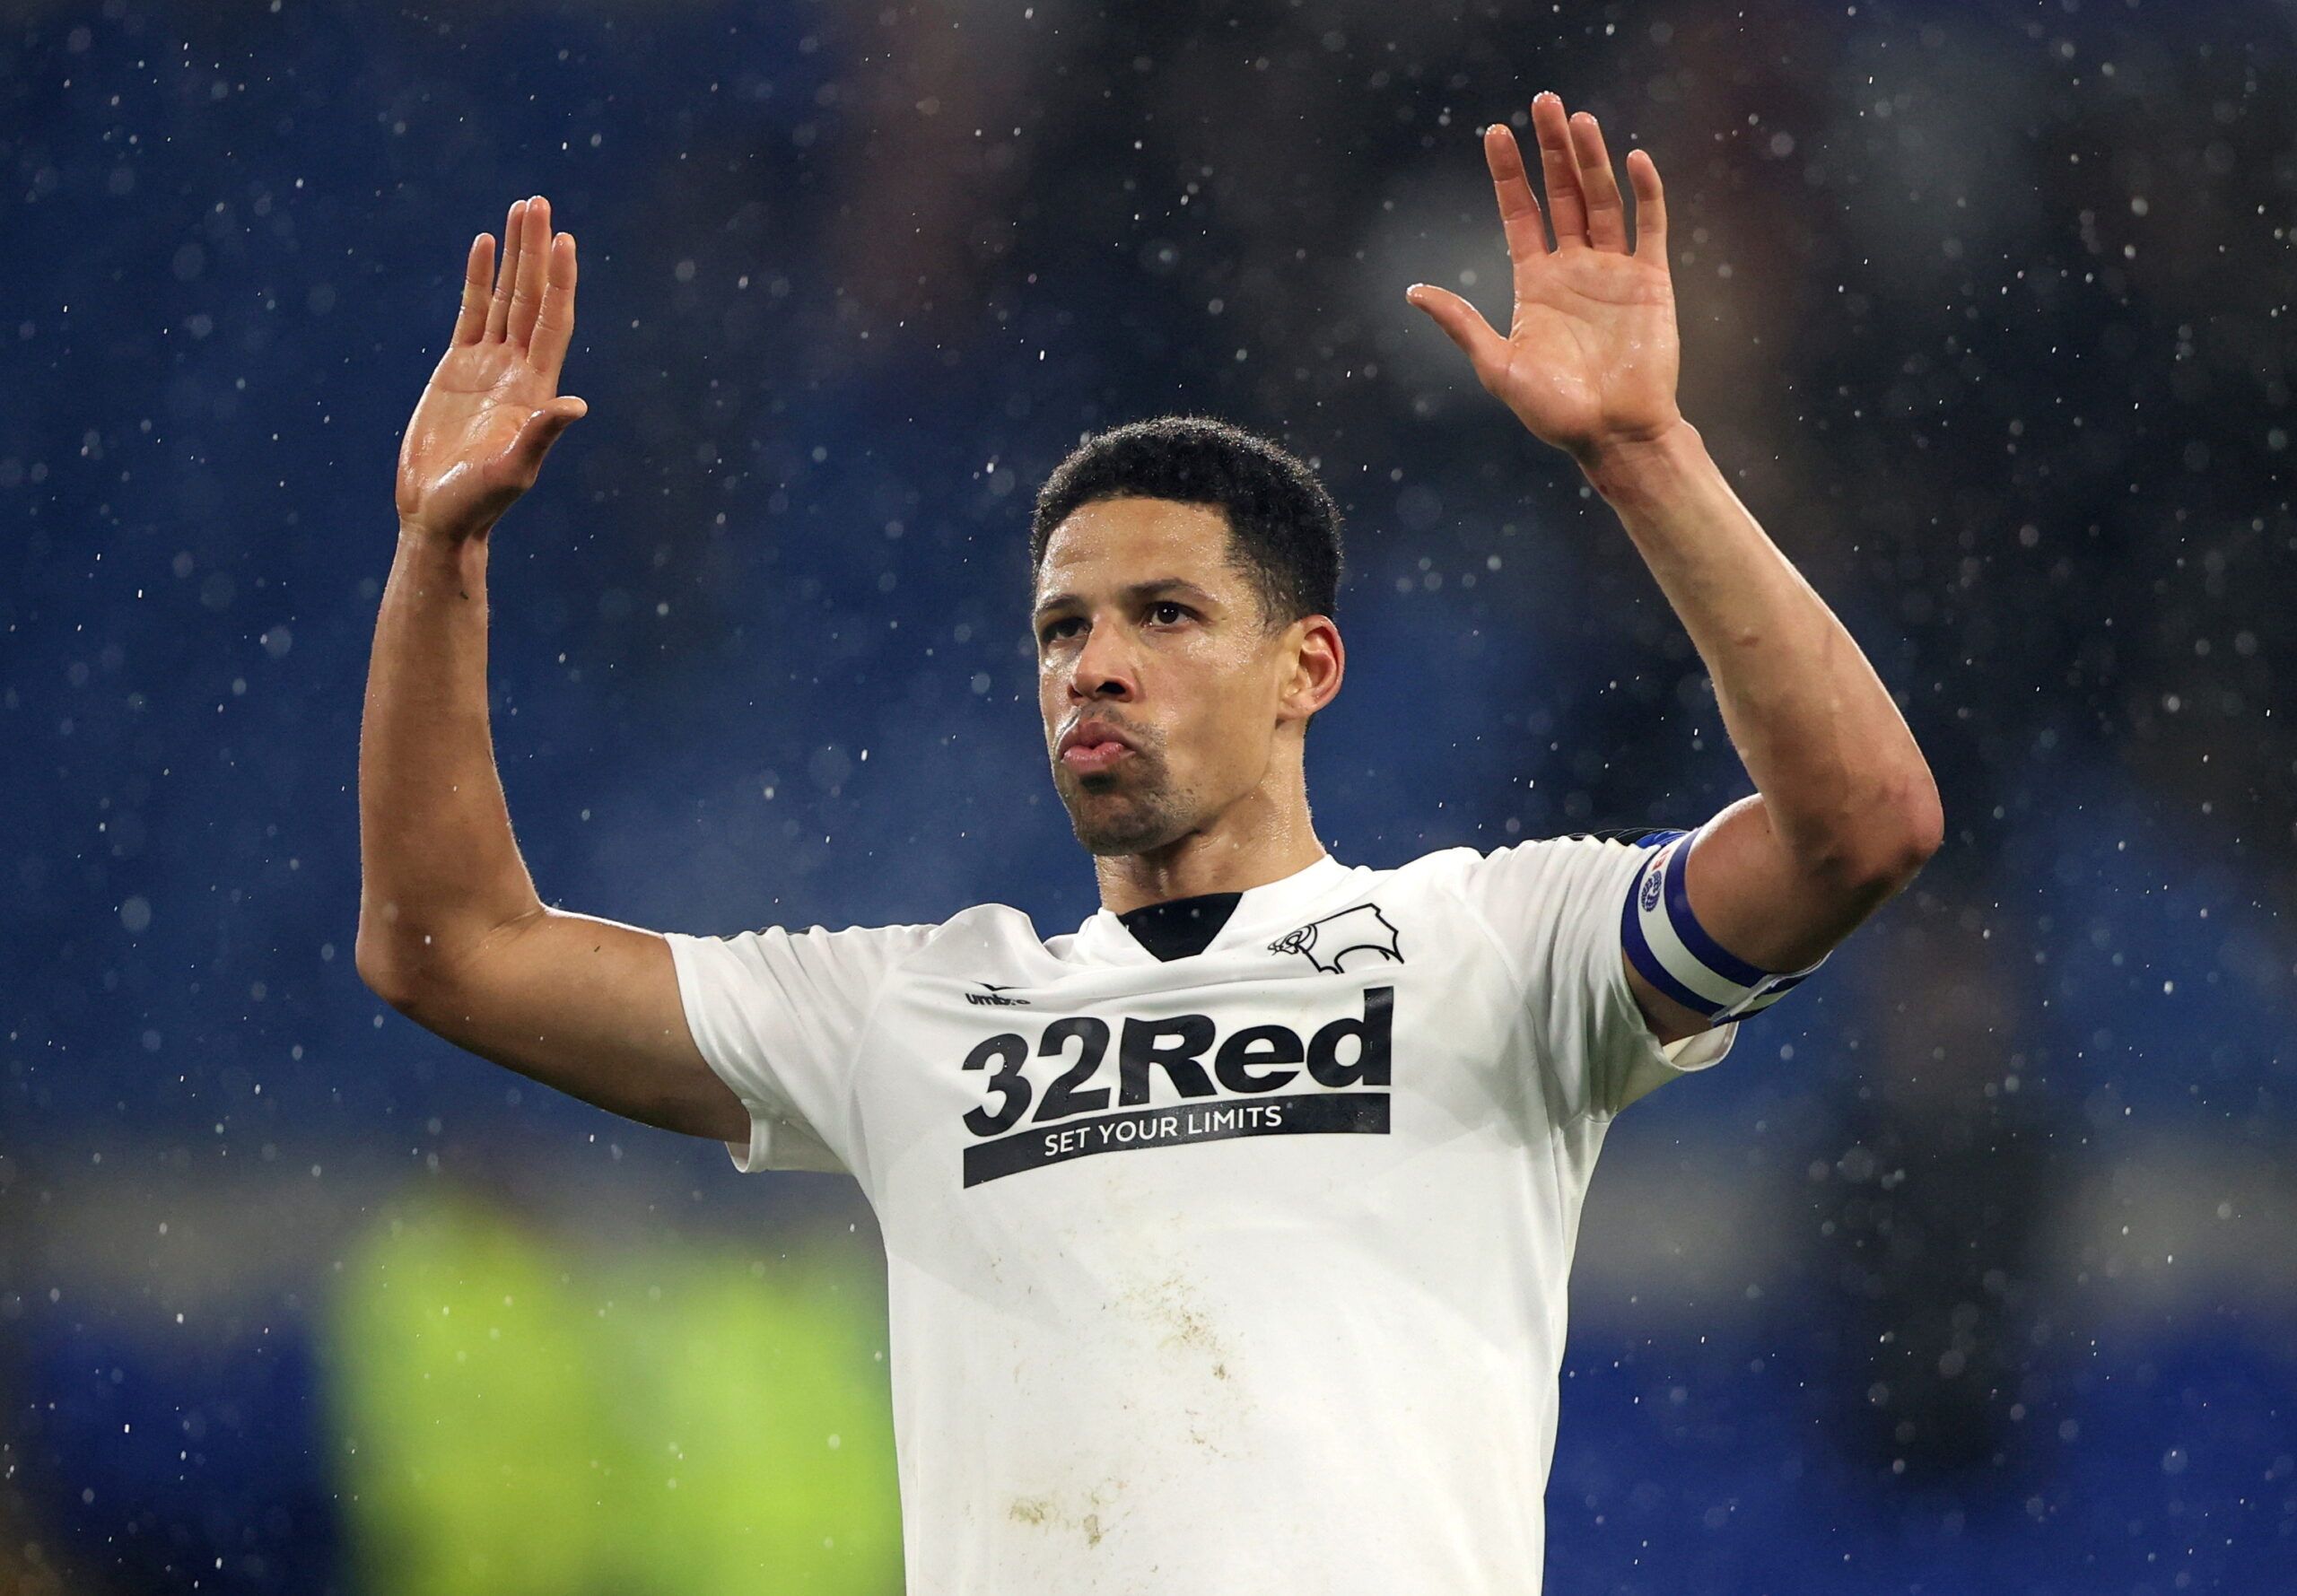 Soccer Football - Championship - Cardiff City v Derby County - Cardiff City Stadium, Cardiff, Britain - March 1, 2022   Derby County's Curtis Davies after the match   Action Images/Molly Darlington    EDITORIAL USE ONLY. No use with unauthorized audio, video, data, fixture lists, club/league logos or 